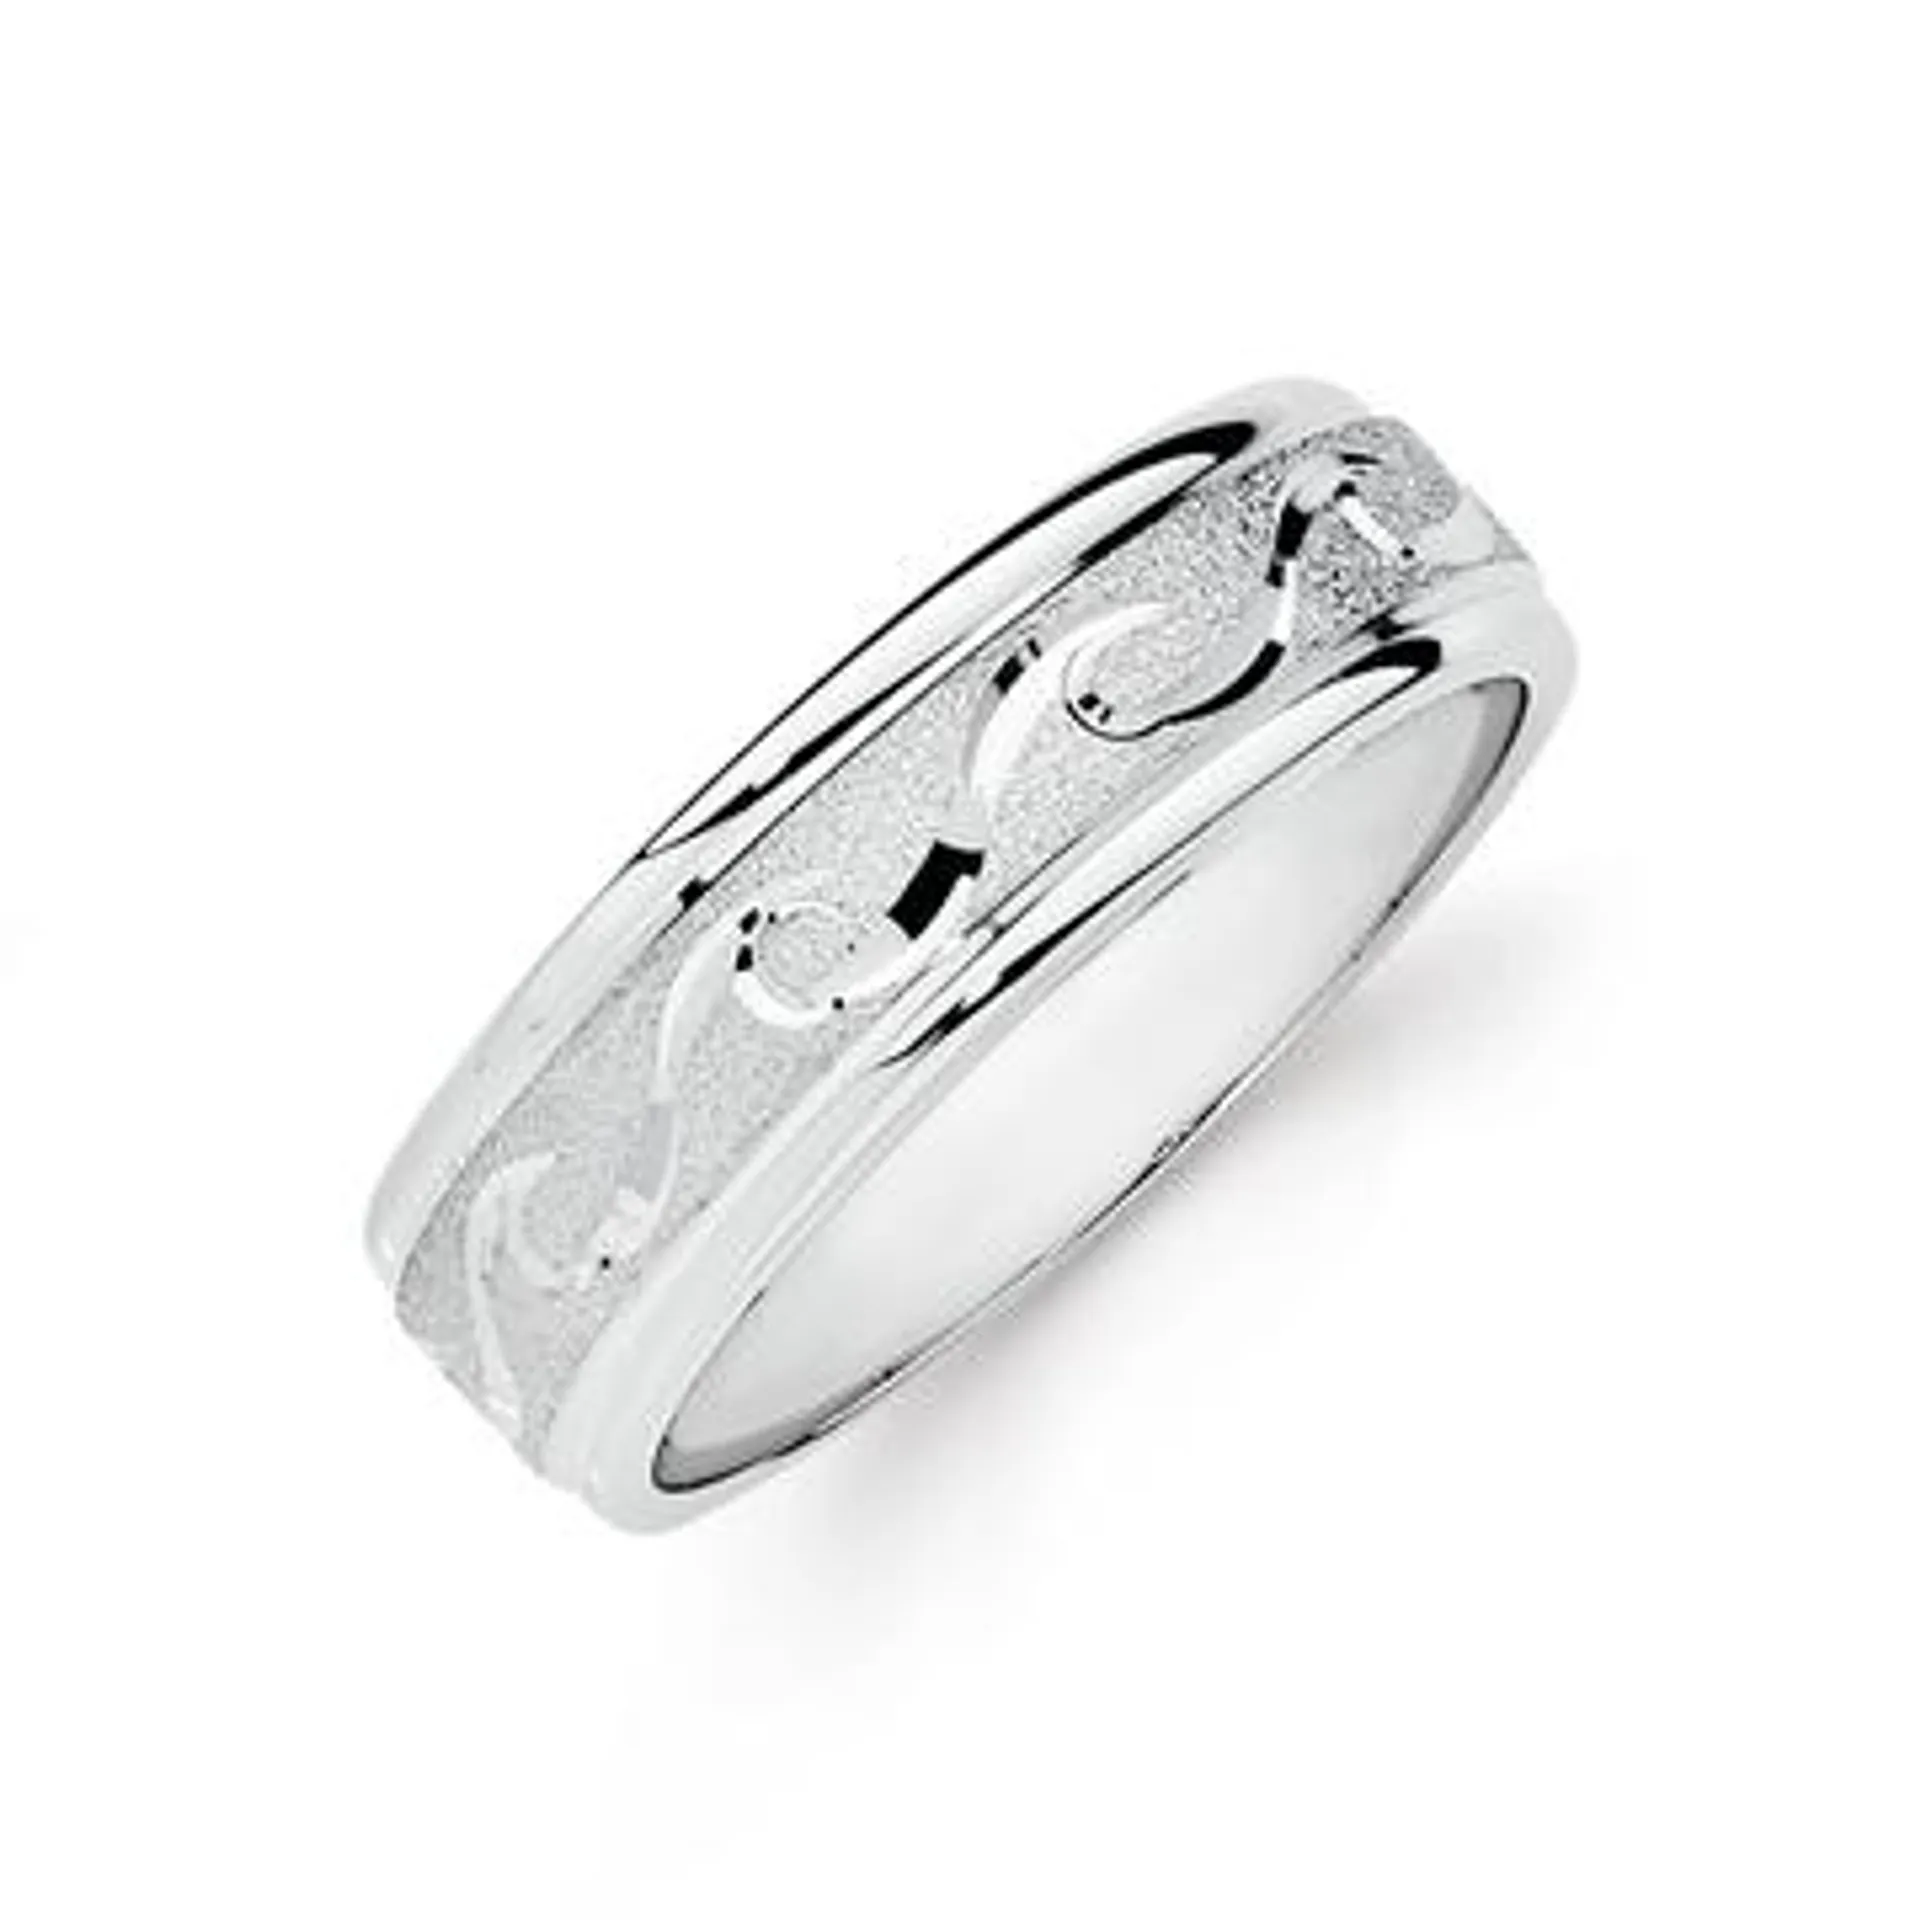 Silver Satin Centre Wave Ring